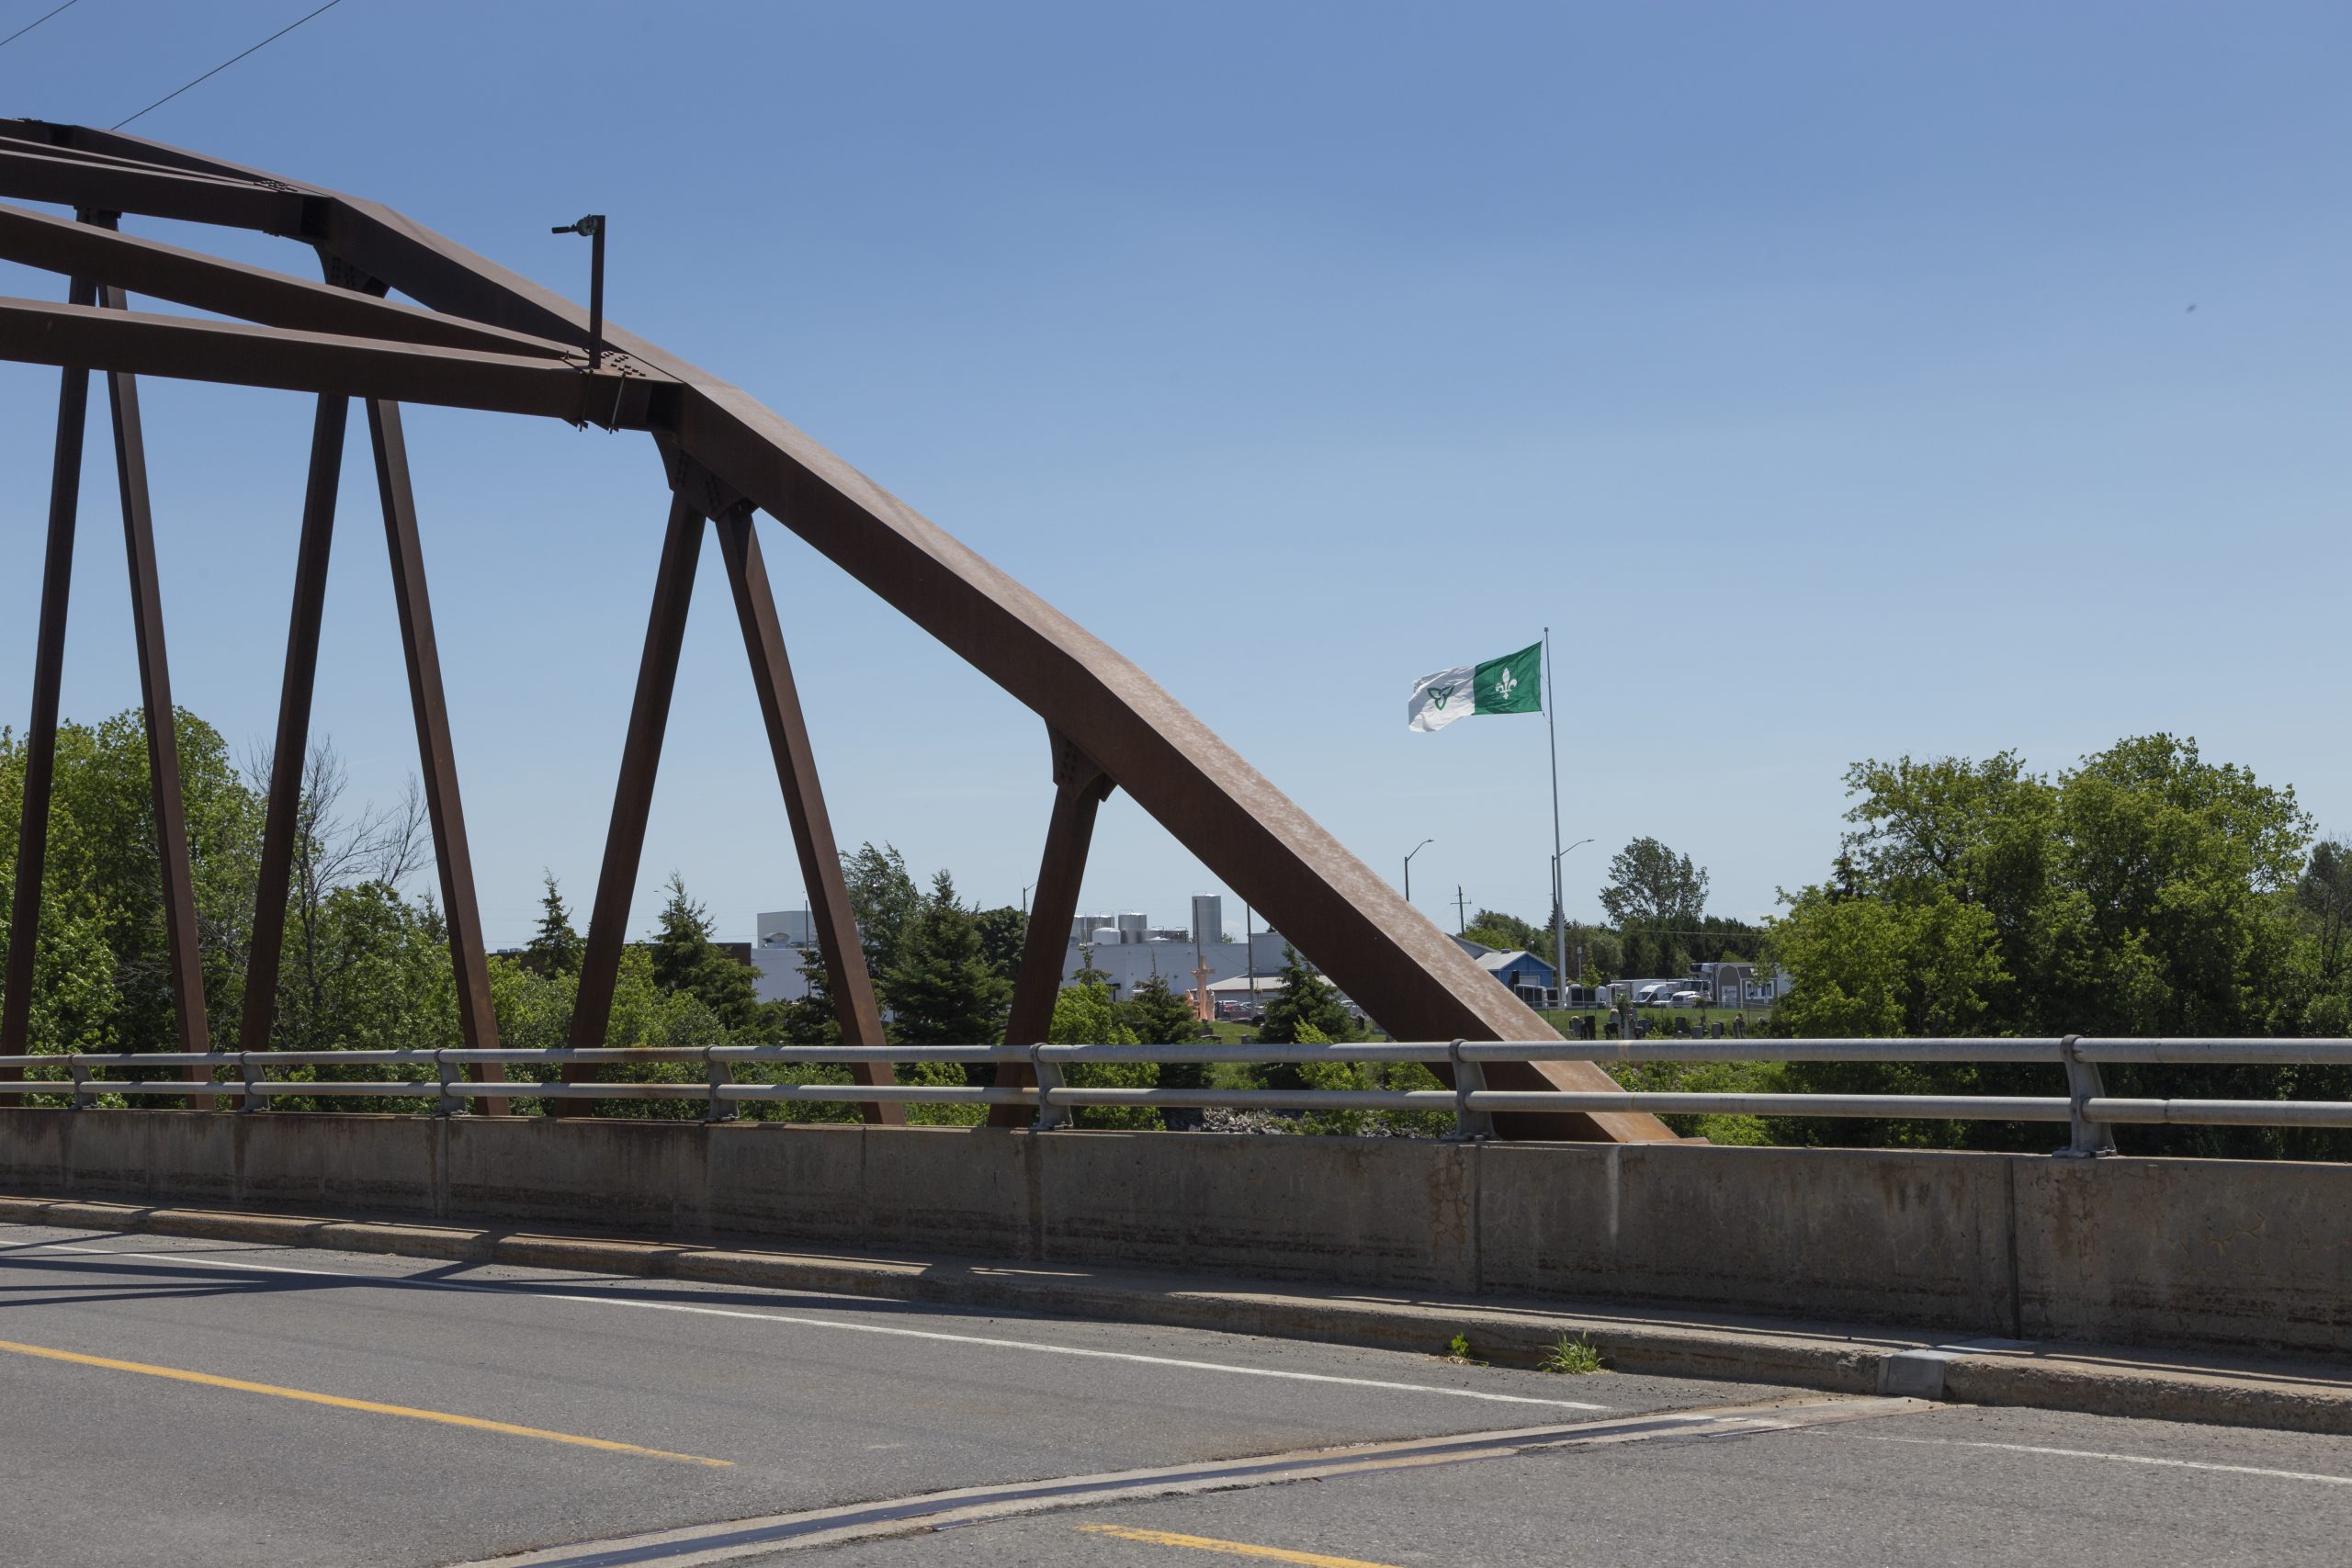 View of the franco-ontarien flag as seen from the St-Albert Bridge